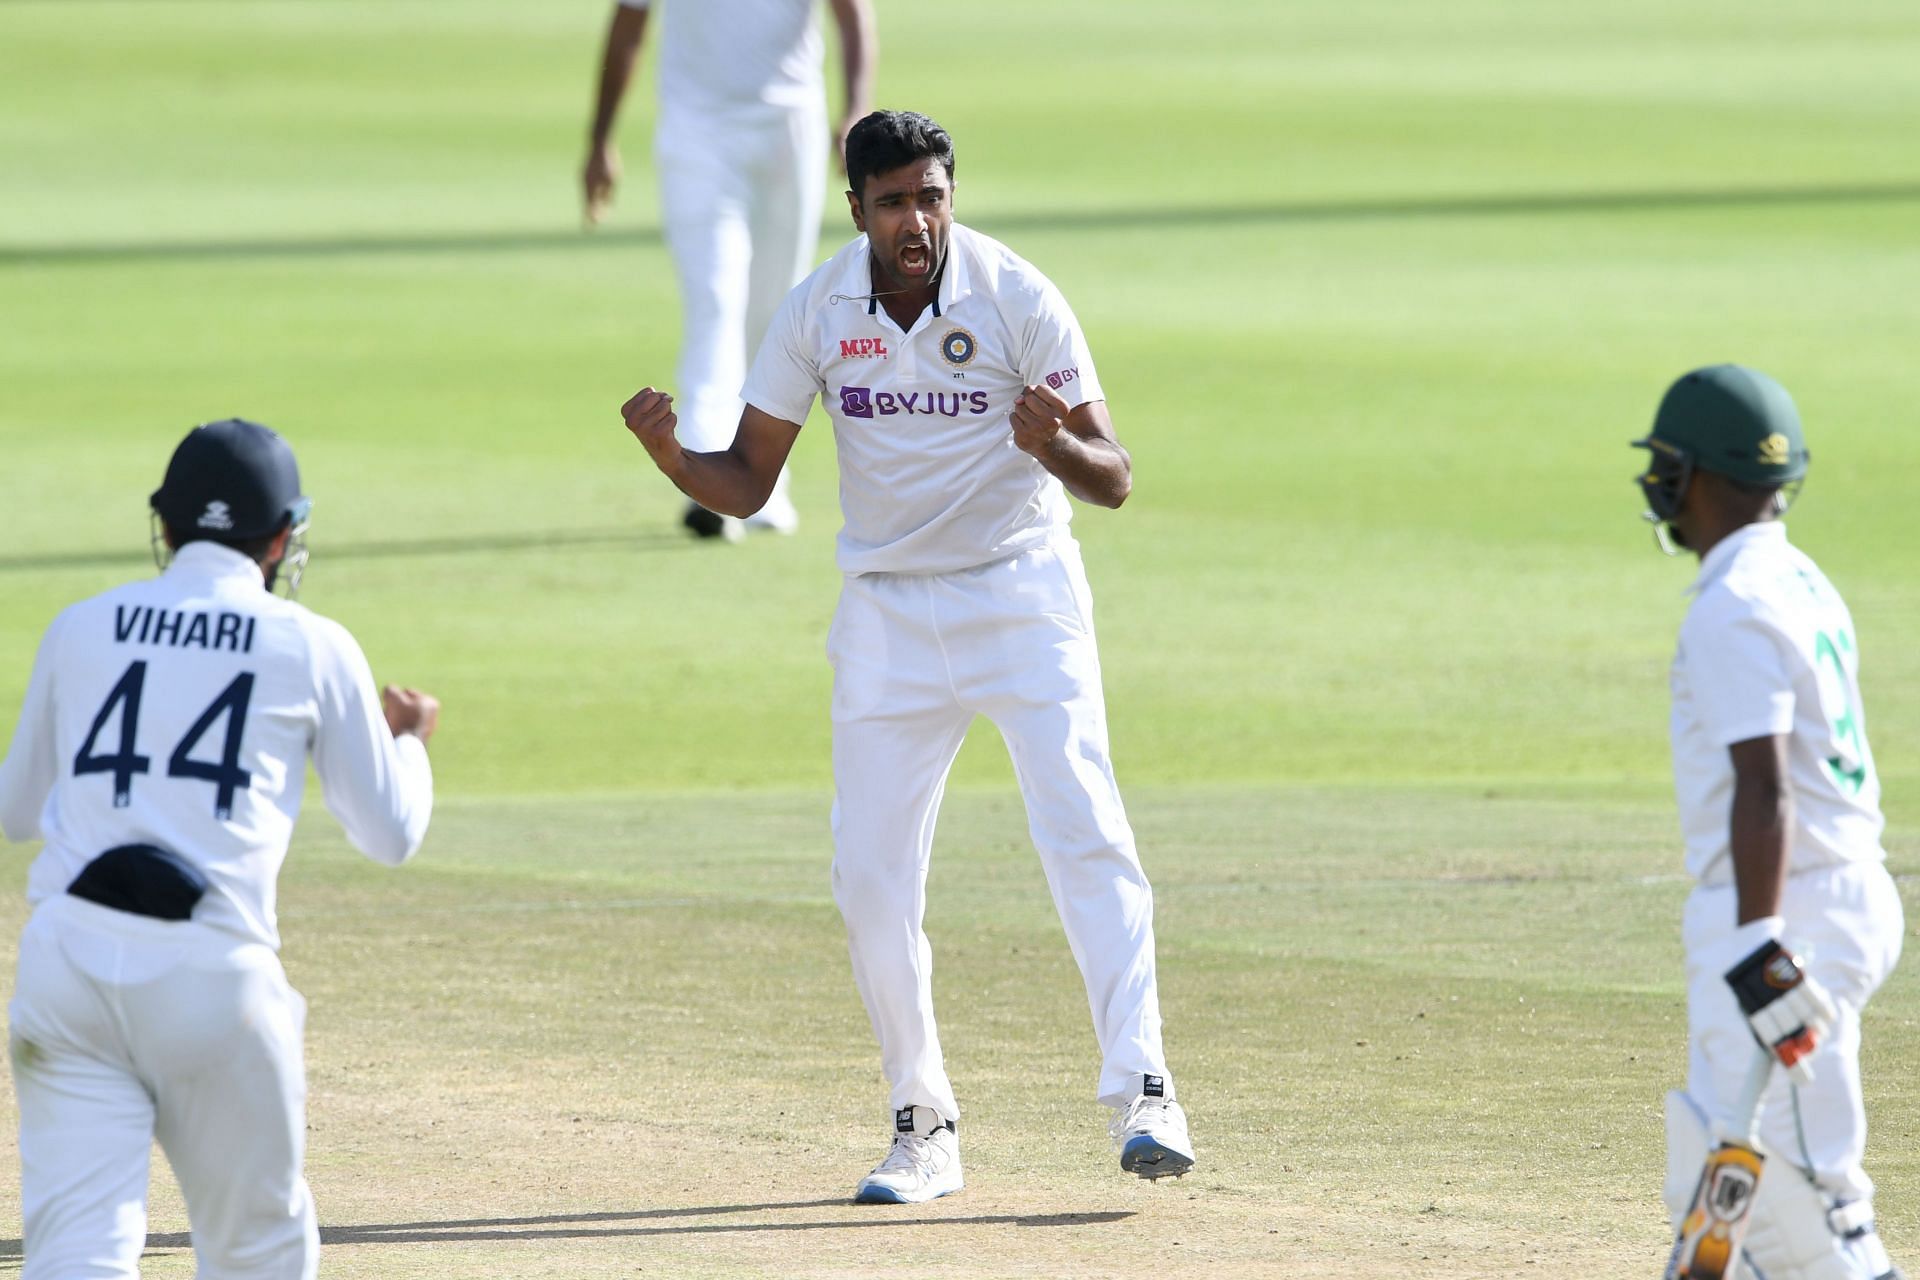 R Ashwin came into the Sri Lanka series after underwhelming performances in South Africa